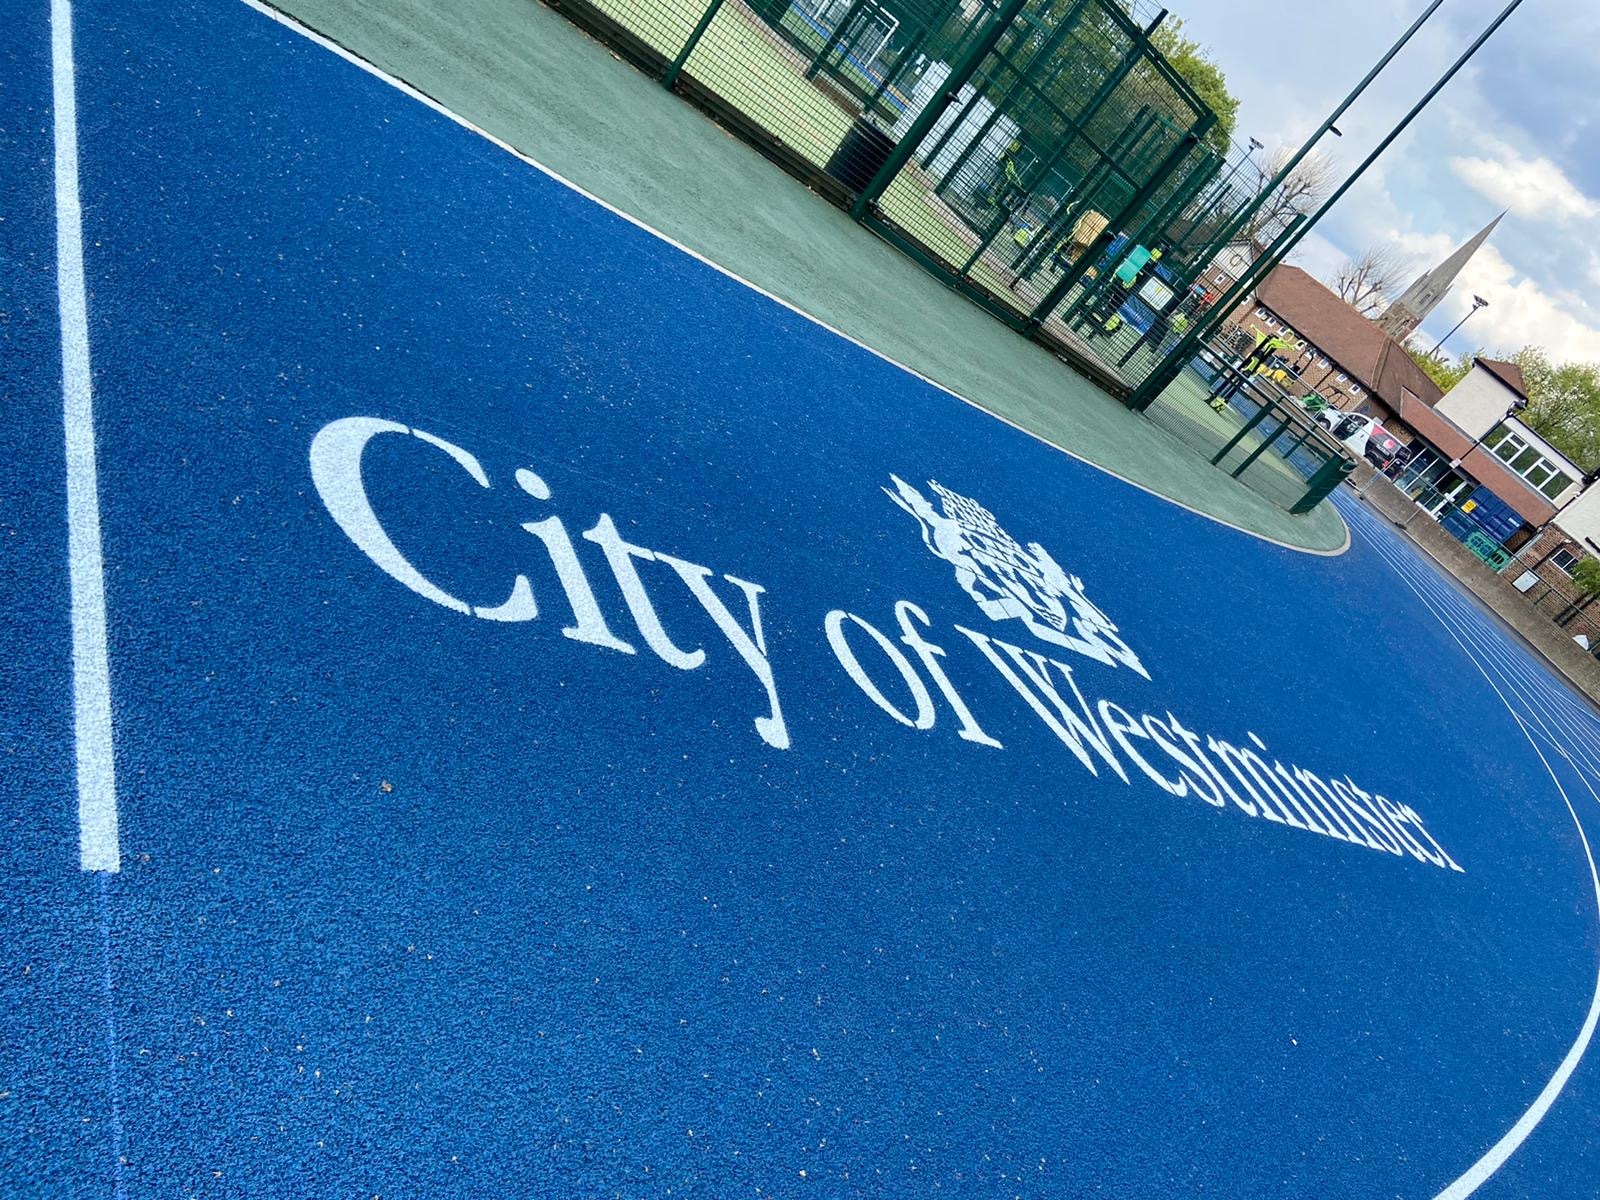 This running track surface is part of a £1.5 million upgrade project by Everyone Active, funded by Westminster City Council.